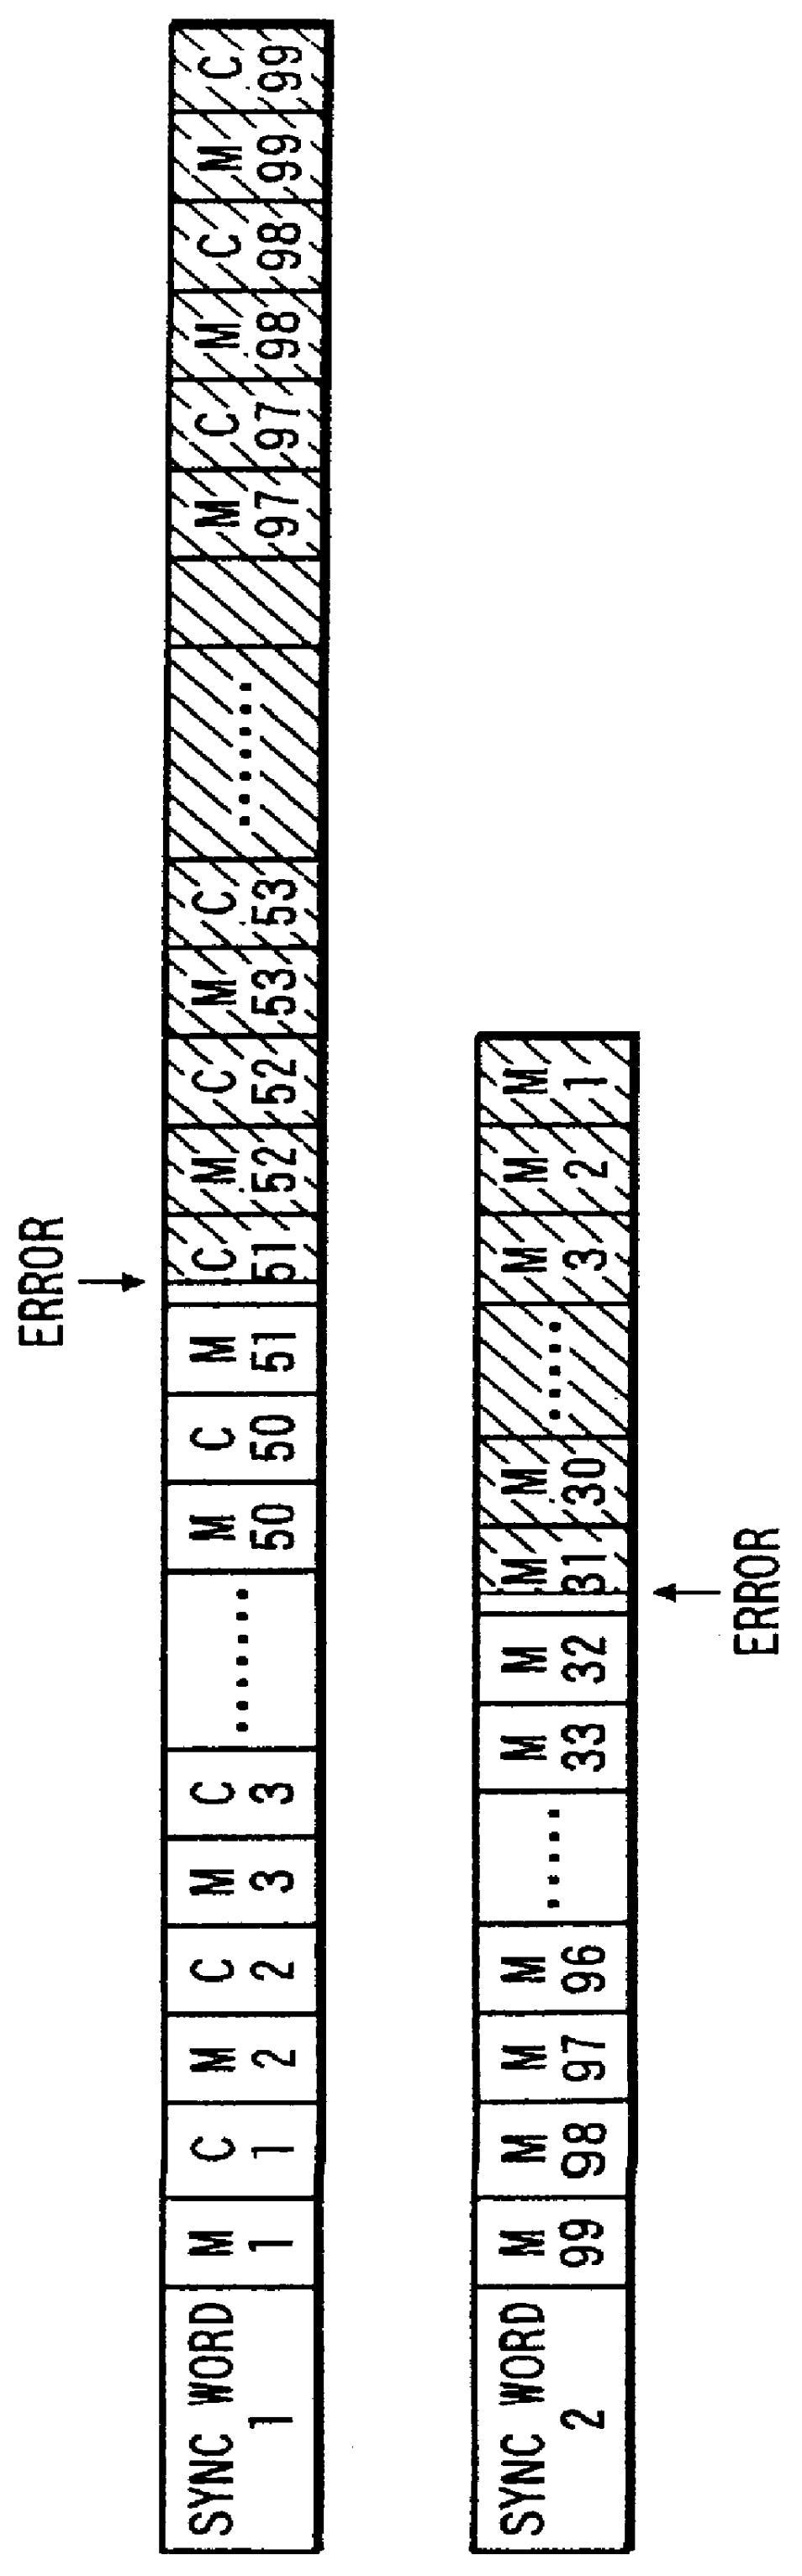 Image coding and decoding method and related apparatus